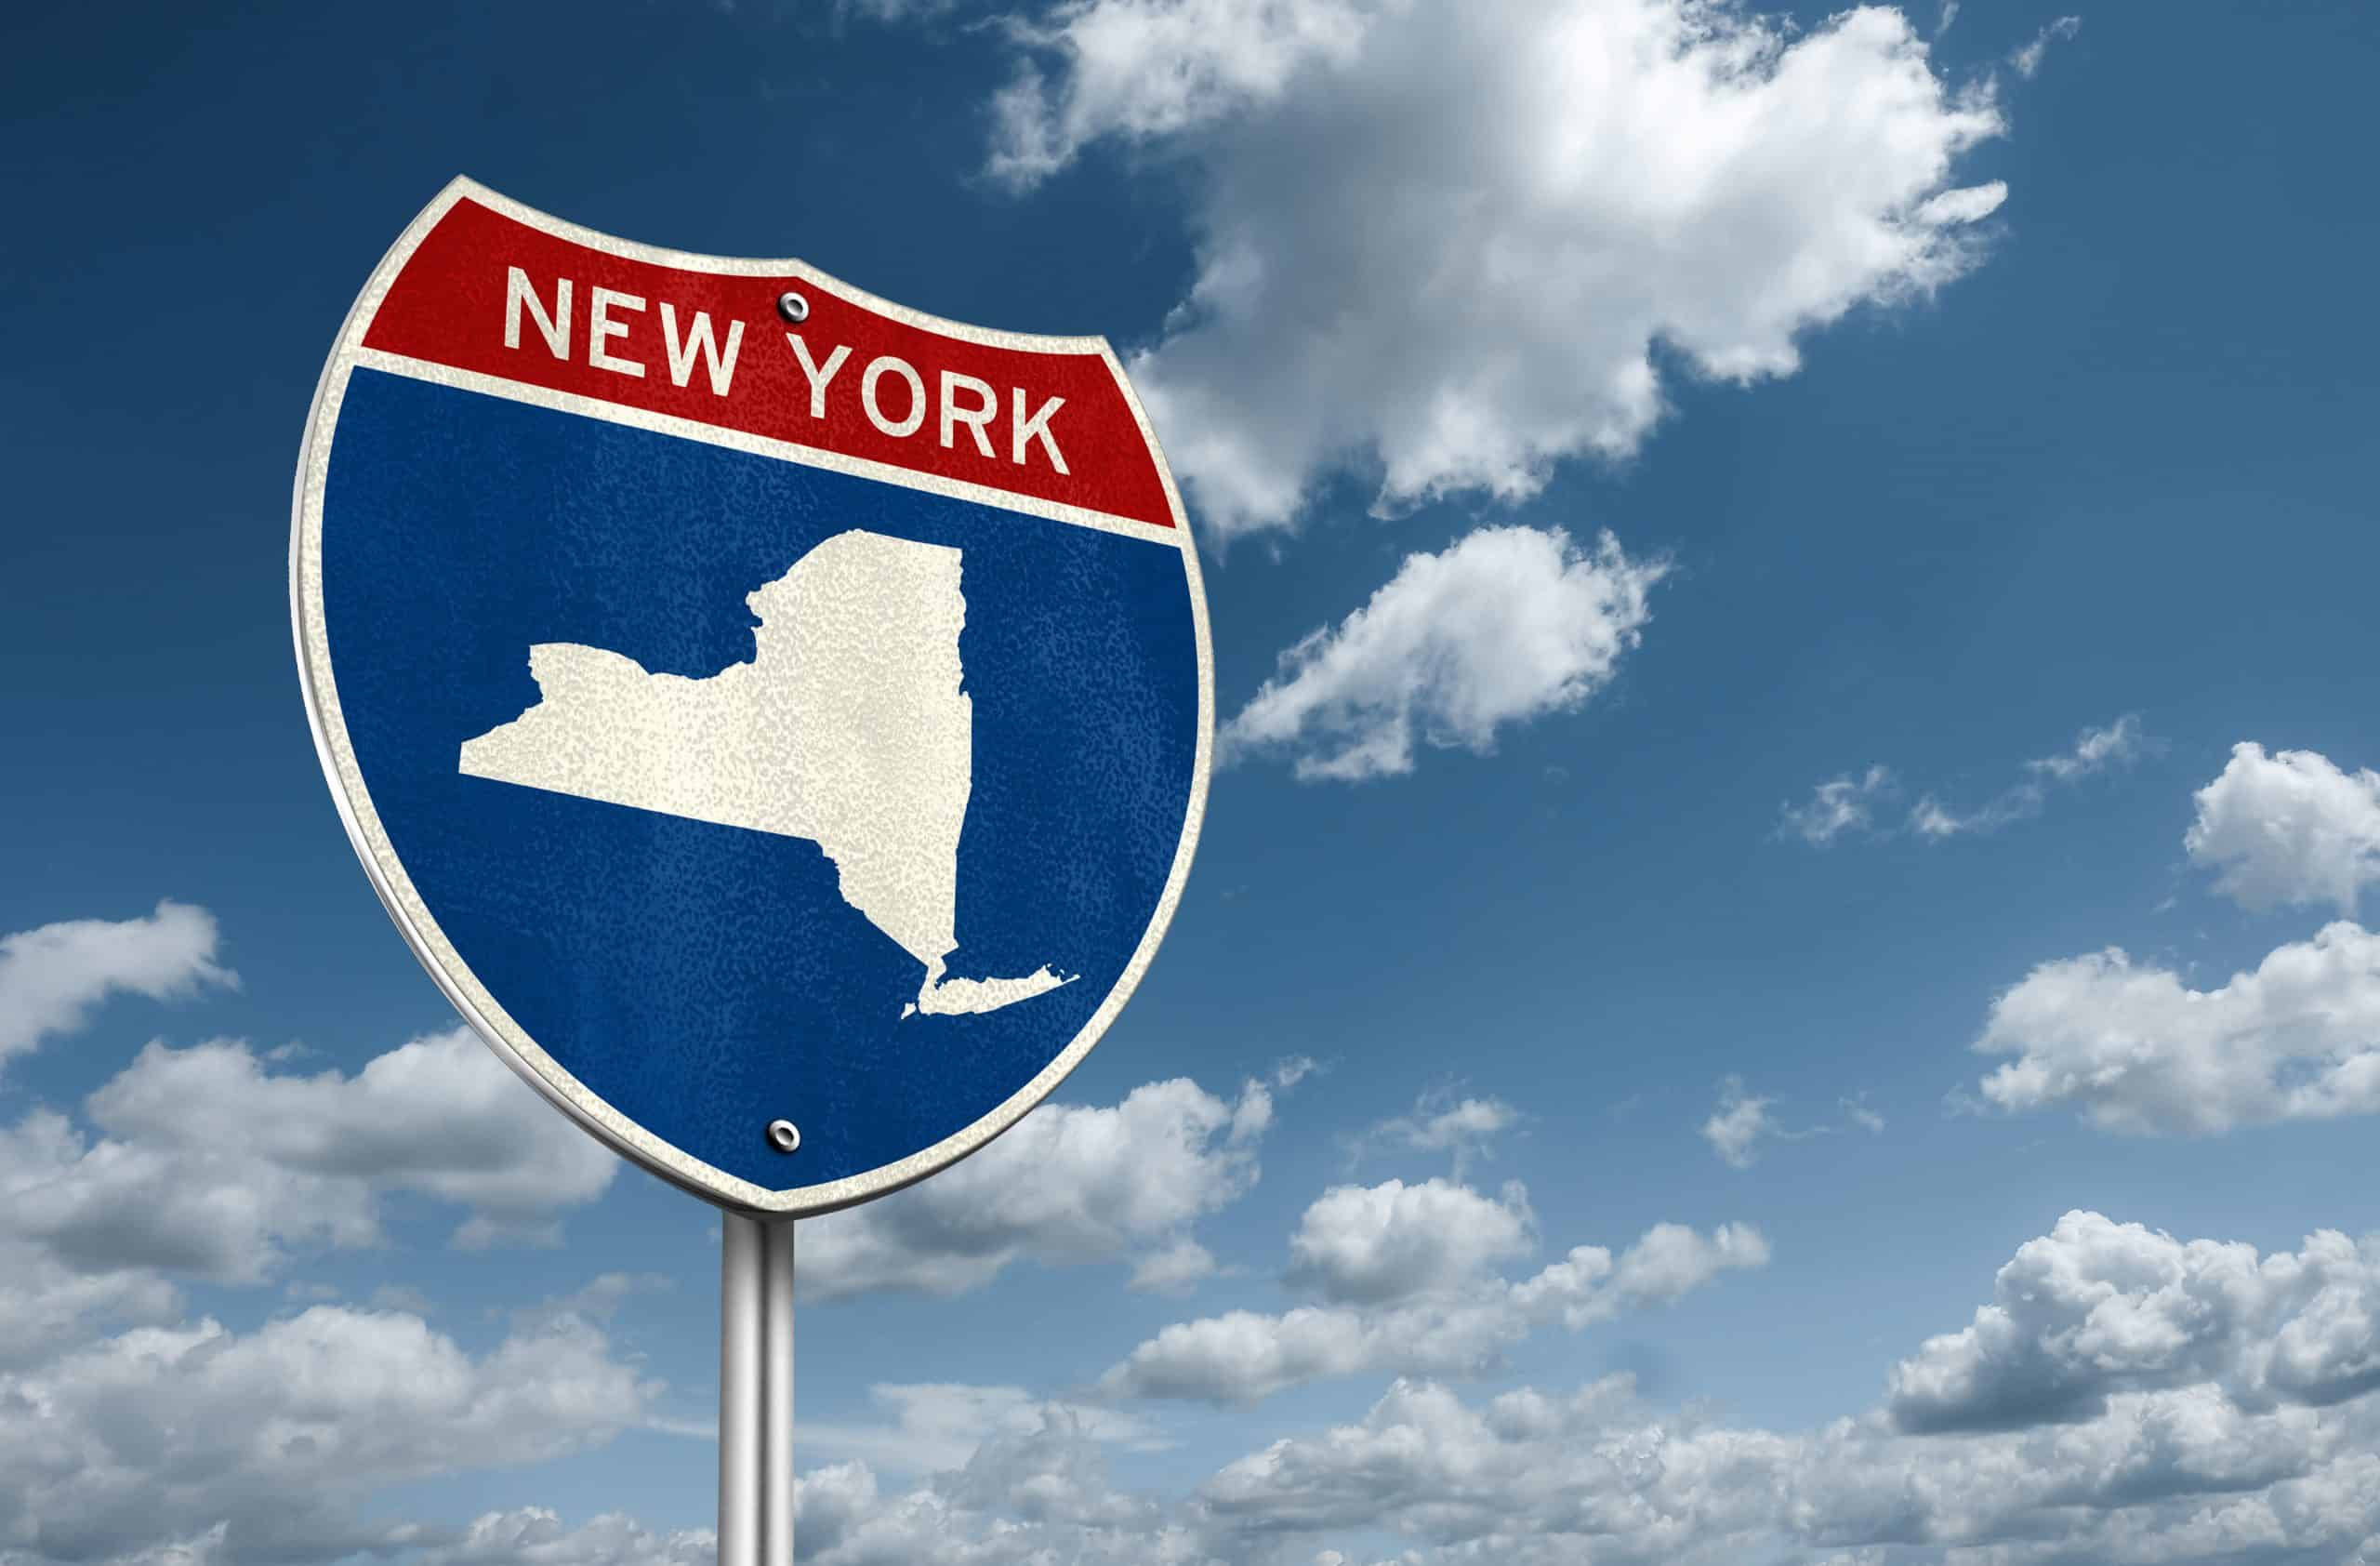 New York Insurance Industry Warns Coverage Crisis Could Be Looming